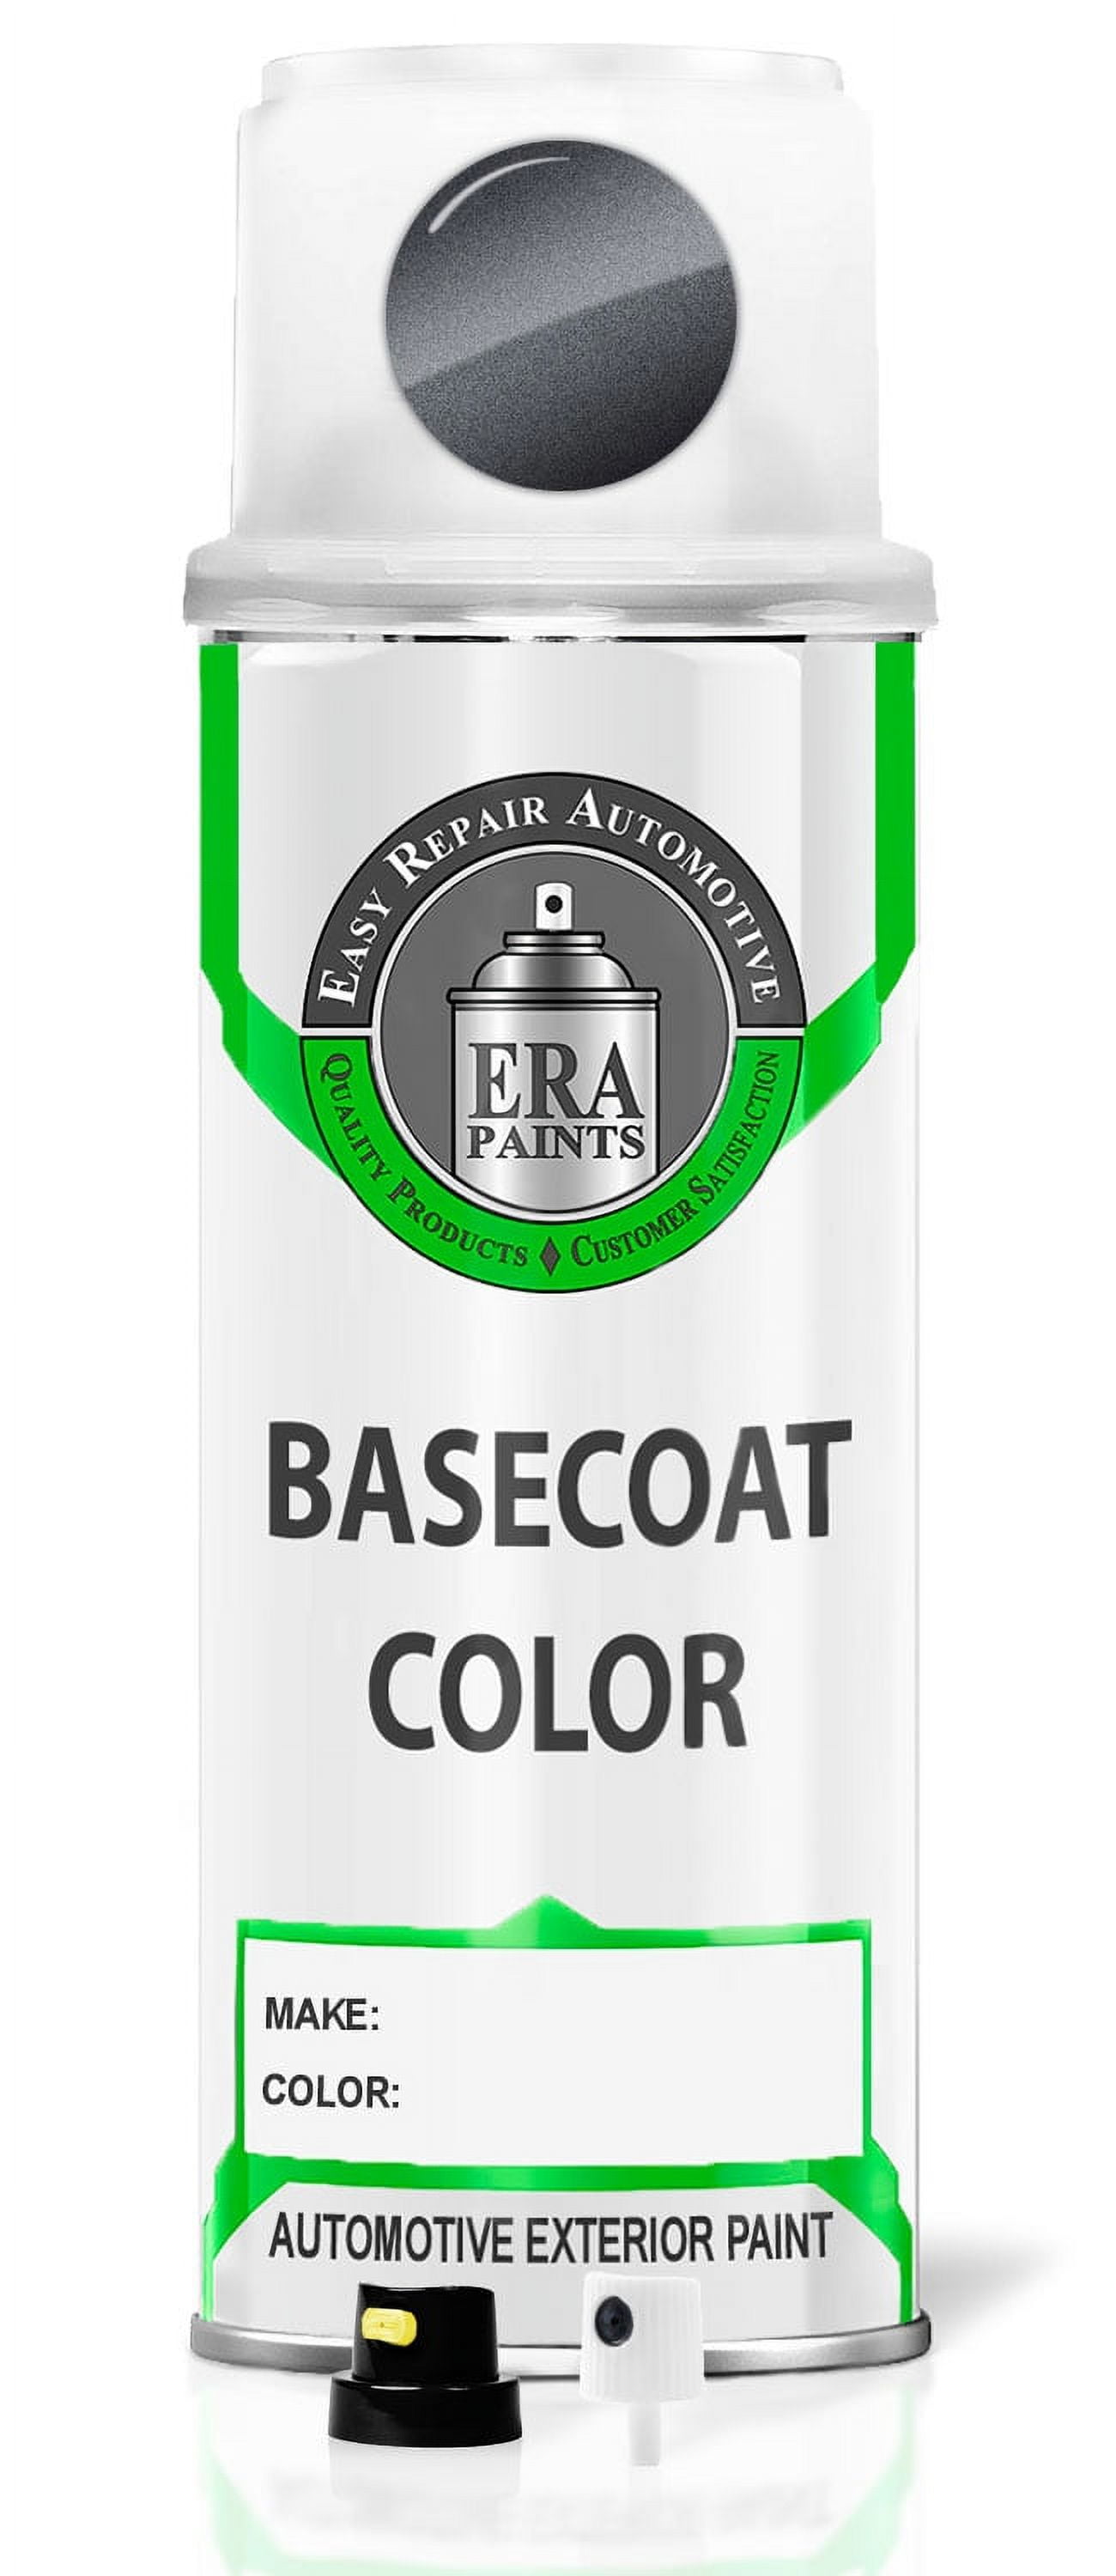 ERA Paints (R4G - Titan Gray Metallic) Compatible with HYUNDAI Generic Model  2019 Exact Match Touch Up Spray Paint Clearcoat and Primer 